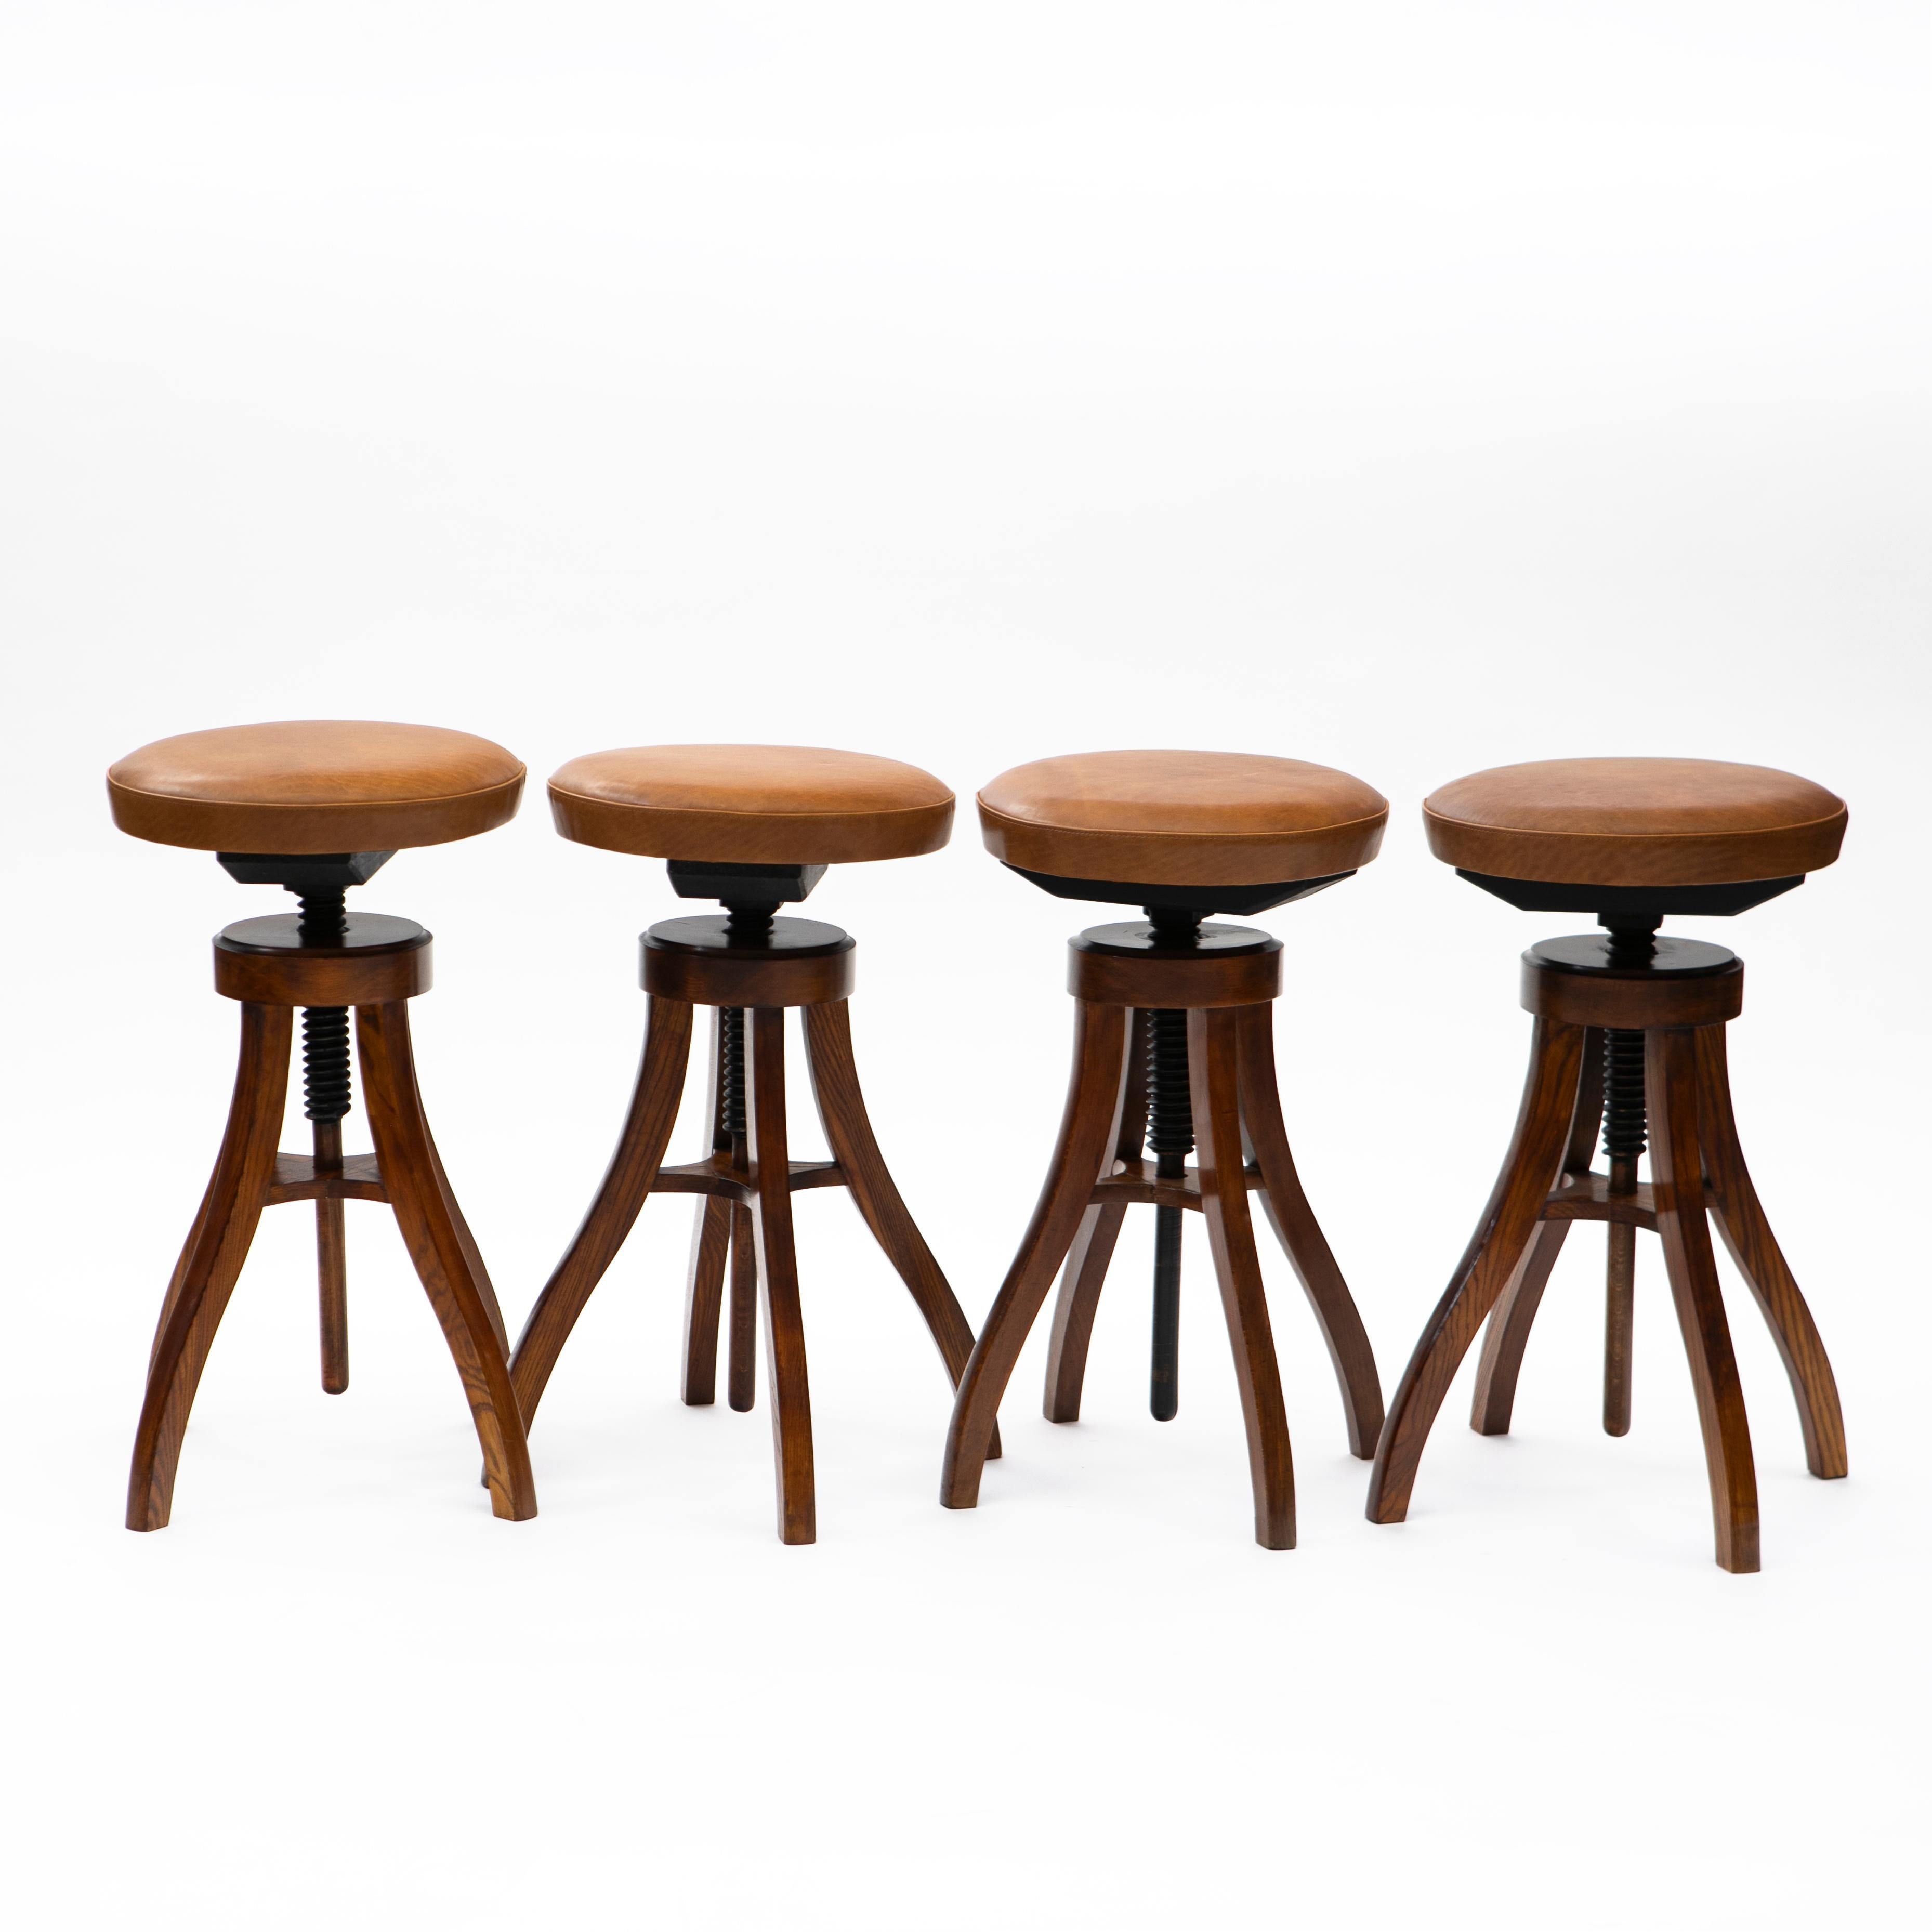 Set of four adjustable bar stools, Fritz Hansen.

Frame in solid oak with seat newly upholstered with cognac leather.

Adjustable height (in photo approx. 72 cm.)
Denmark approx. 1940.

